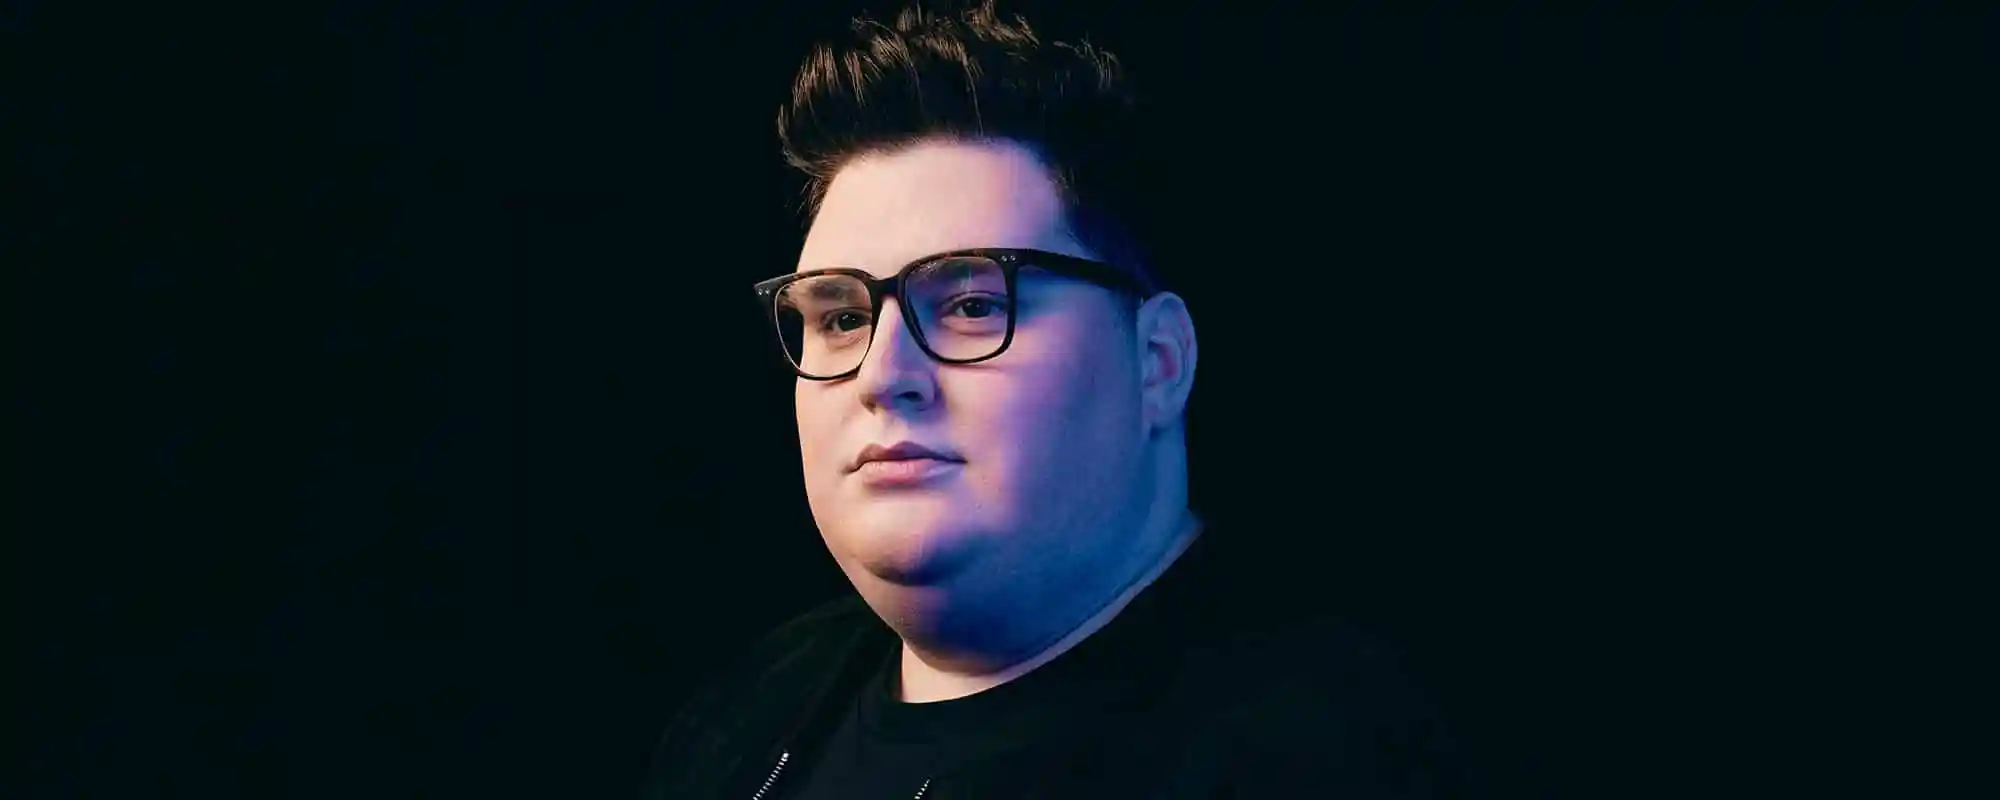 “The Voice” Winner, Jordan Smith, Debuts New Faith-Based Single, “Great You Are”